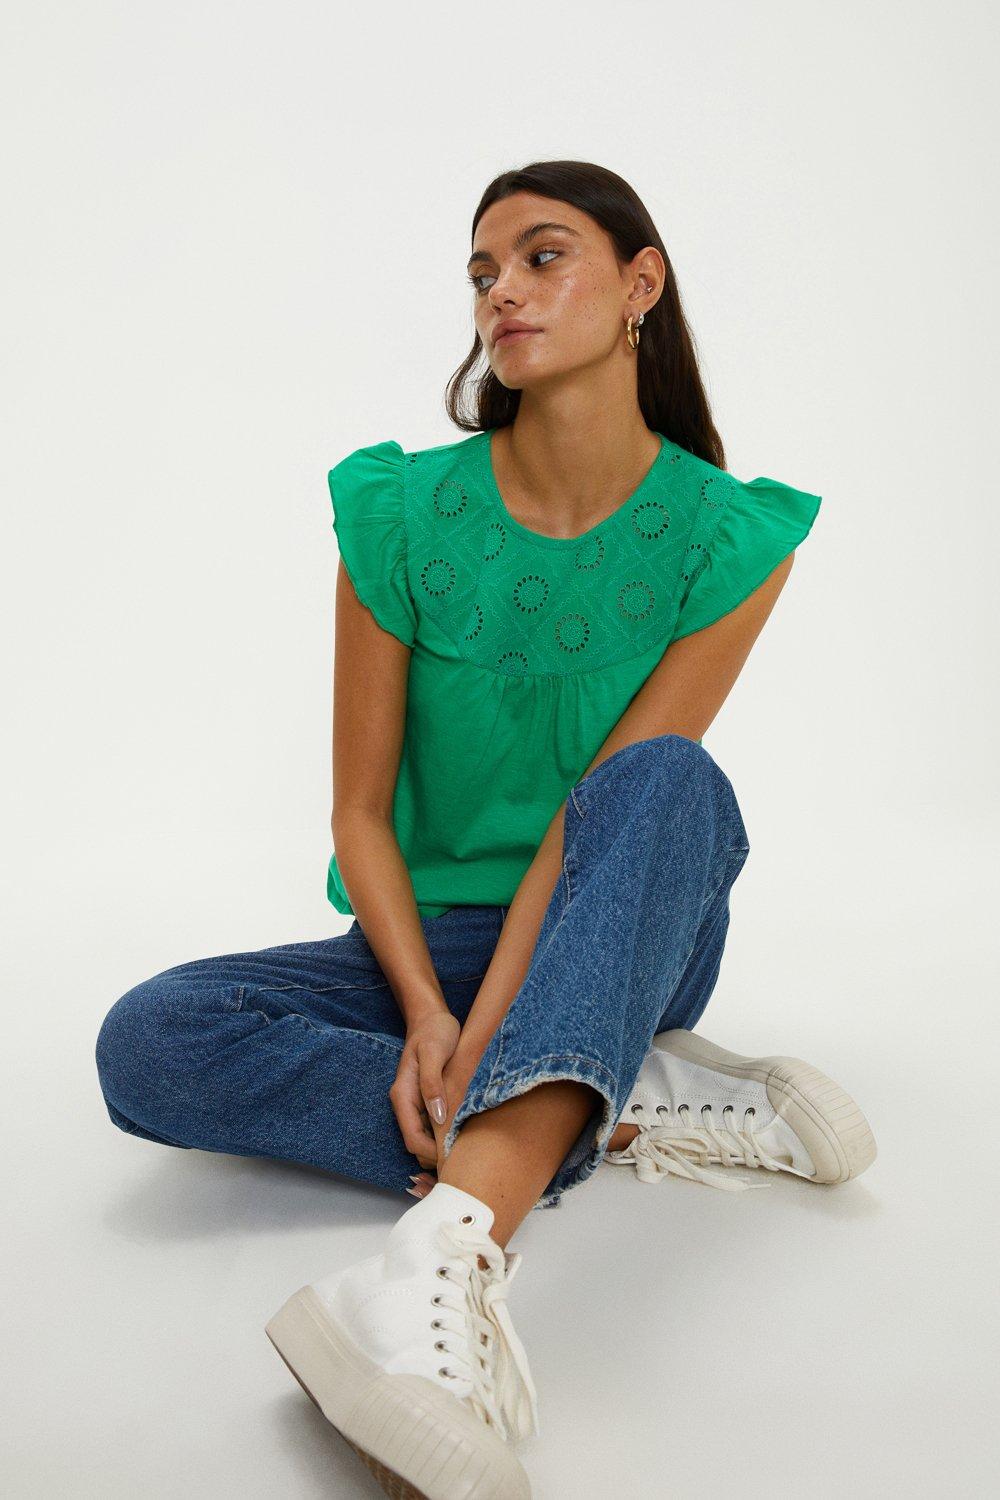 Broderie Yoke And Frill Sleeve Topgreen